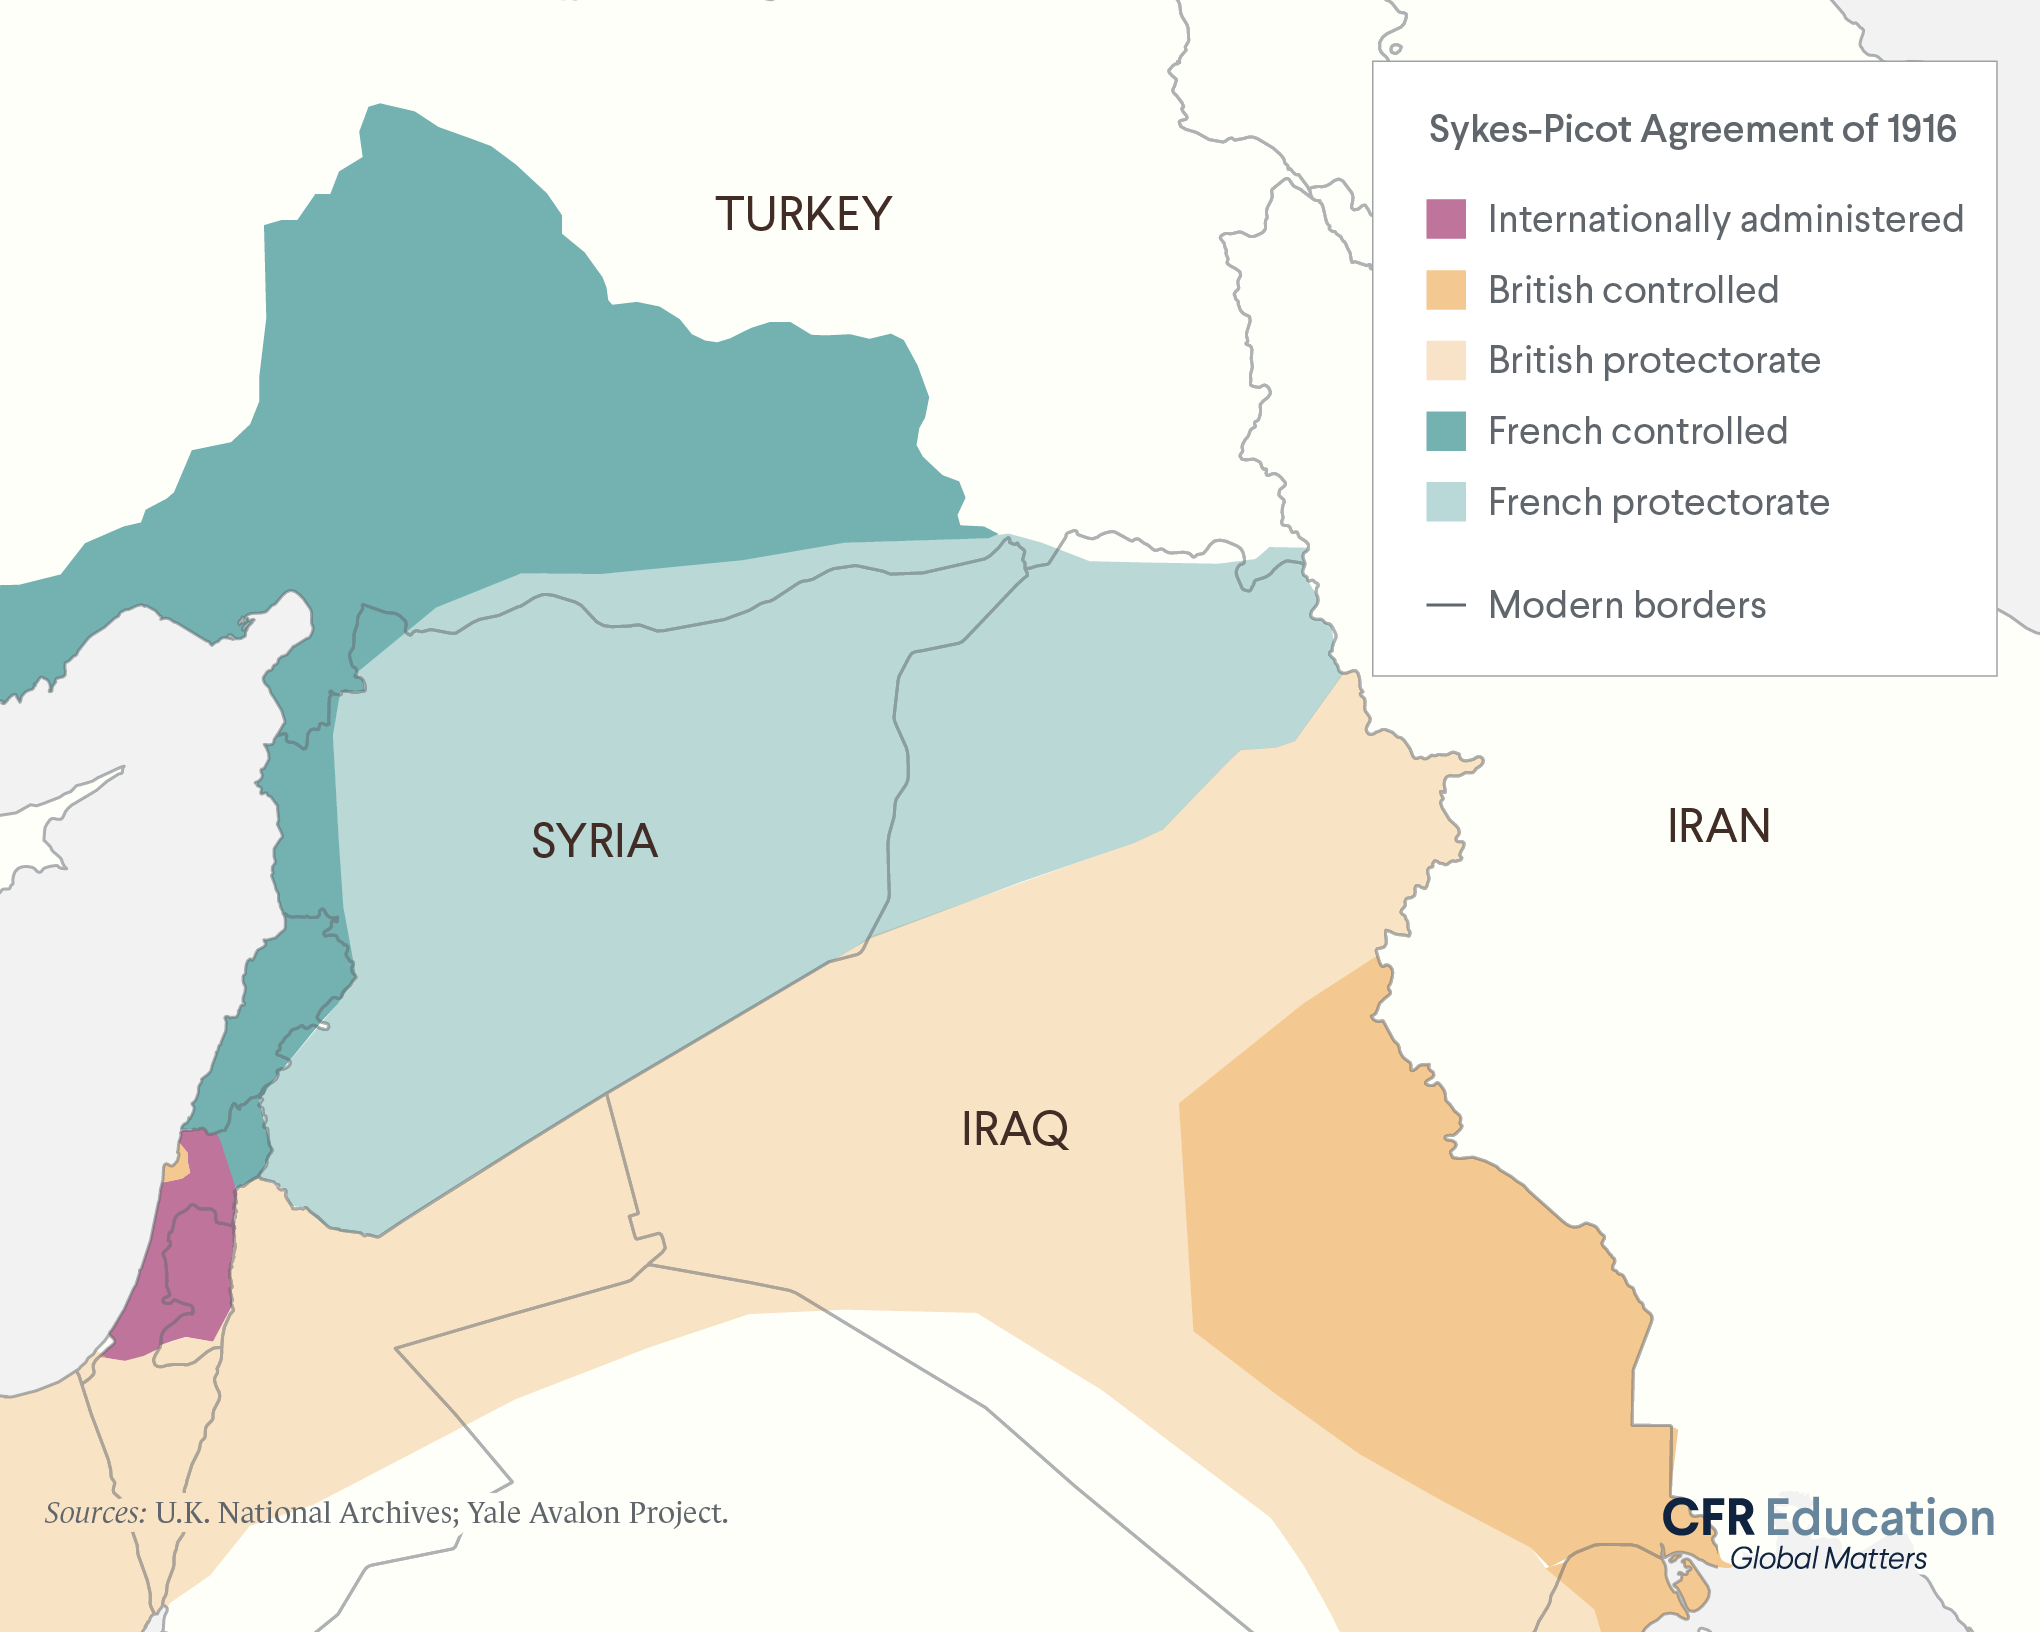 Map illustrates Middle East under Sykes-Picot Agreement 1916, including internationally administered areas, British controlled and French controlled areas, and British and French protectorates. For more info contact us at cfr_education@cfr.org.